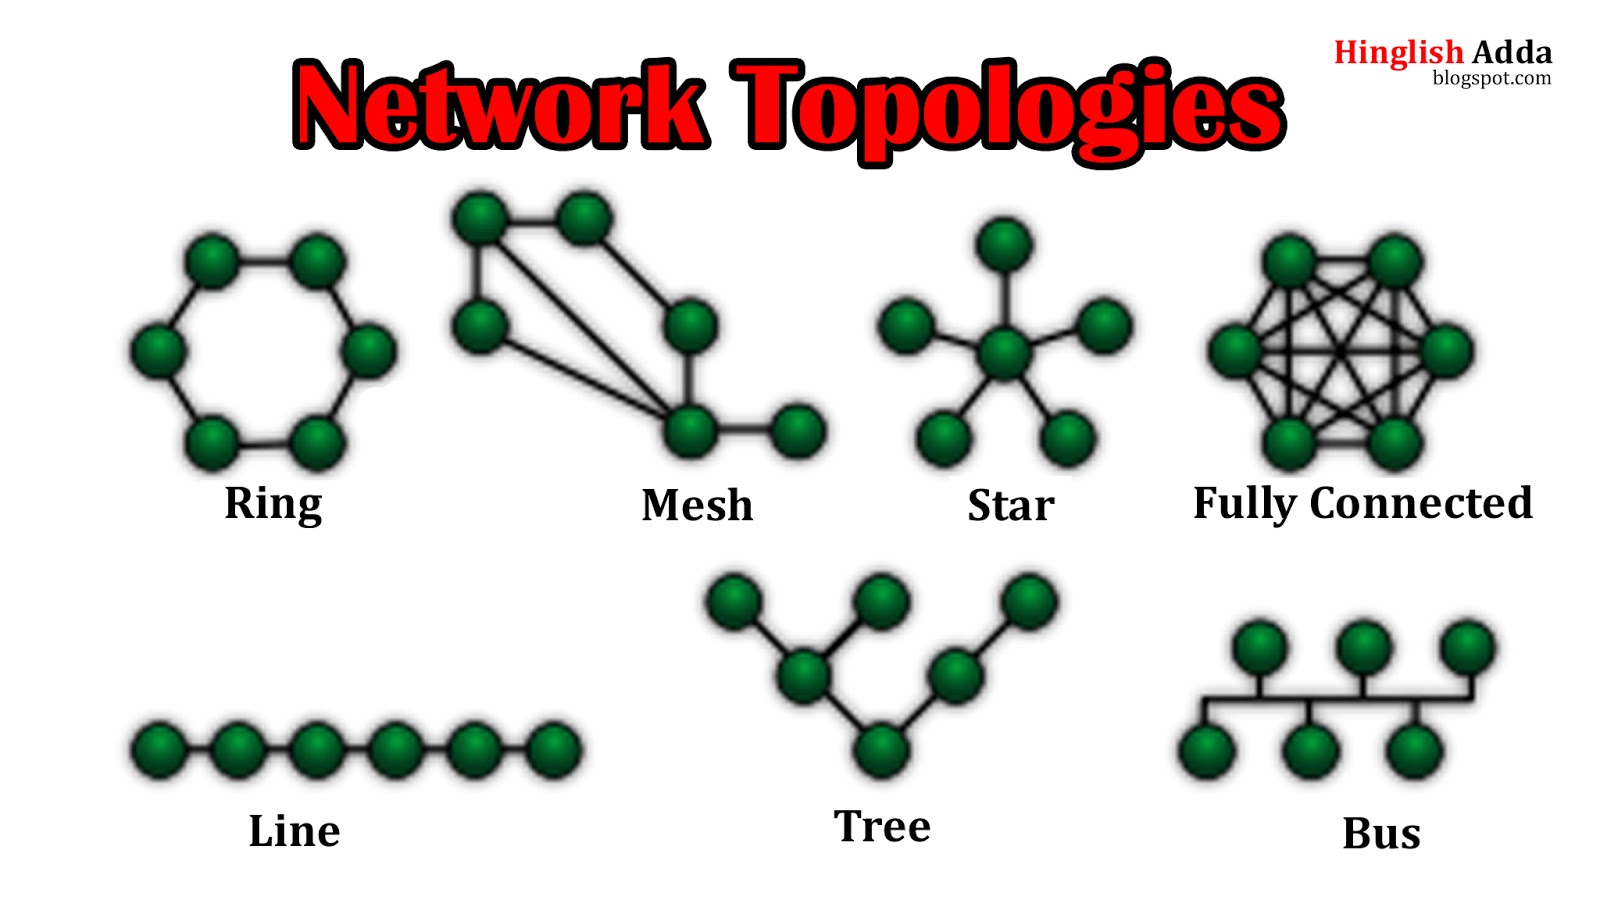 10 Advantages And Disadvantages Of Tree Topology | Drawbacks And Benefits  Of Tree Topology